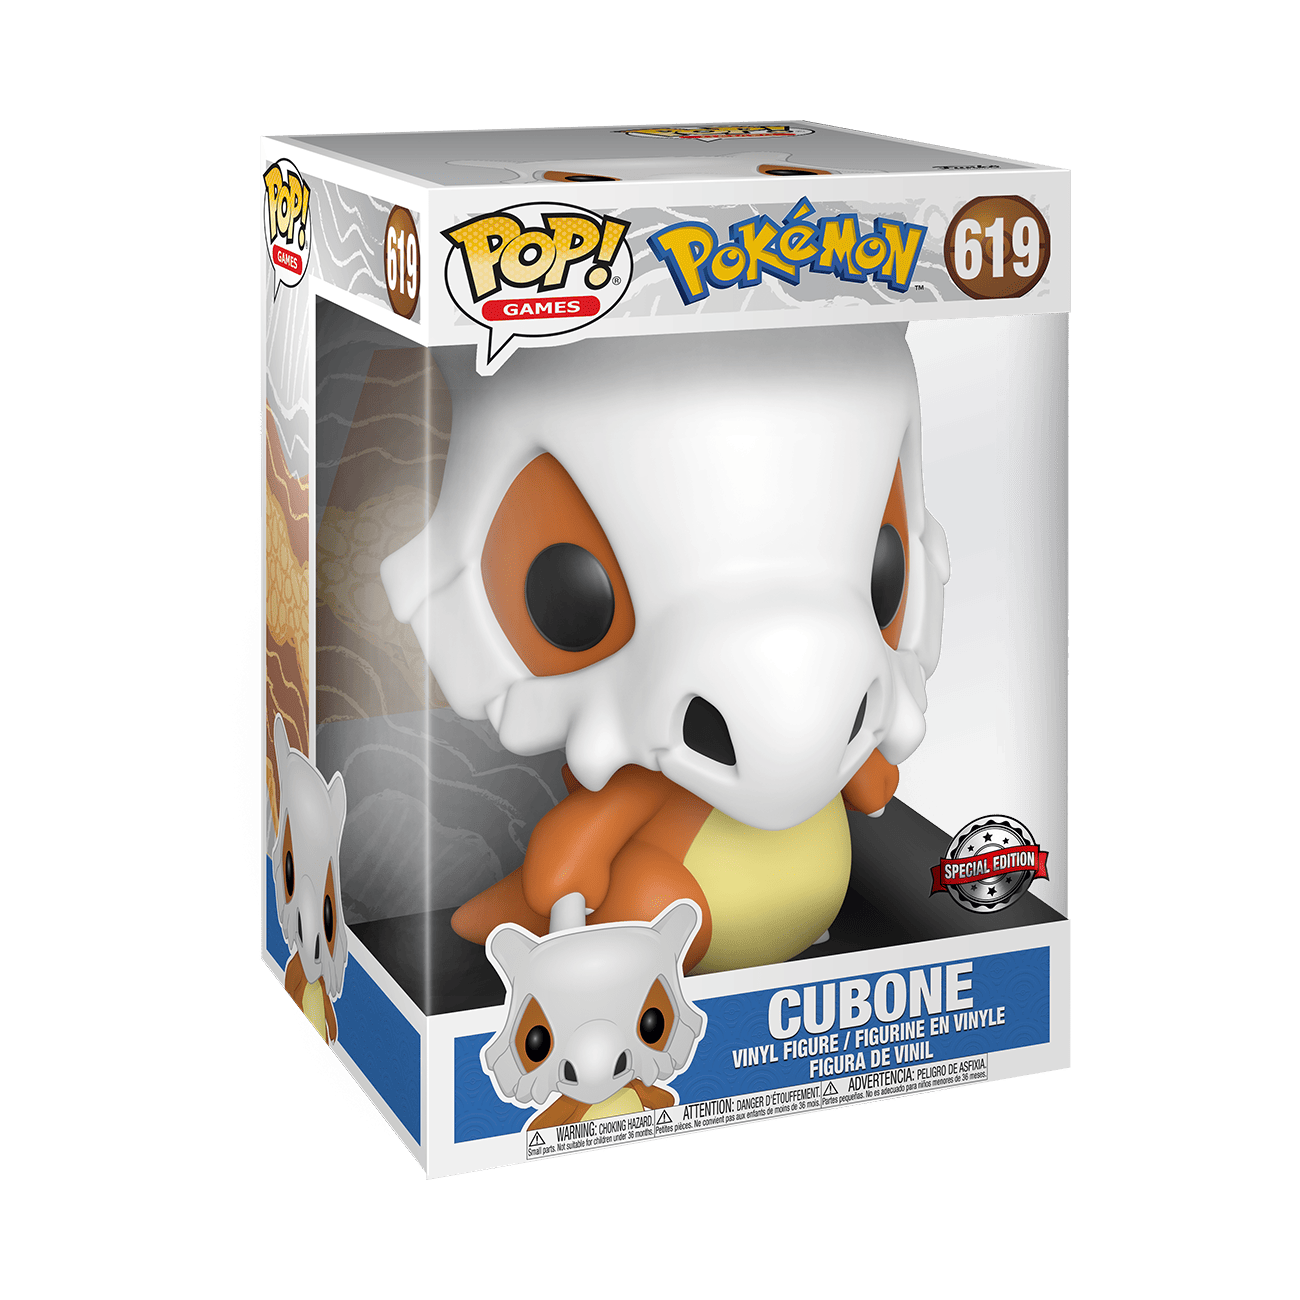 Funko Pops! - The Sizes, Terms, and Variants